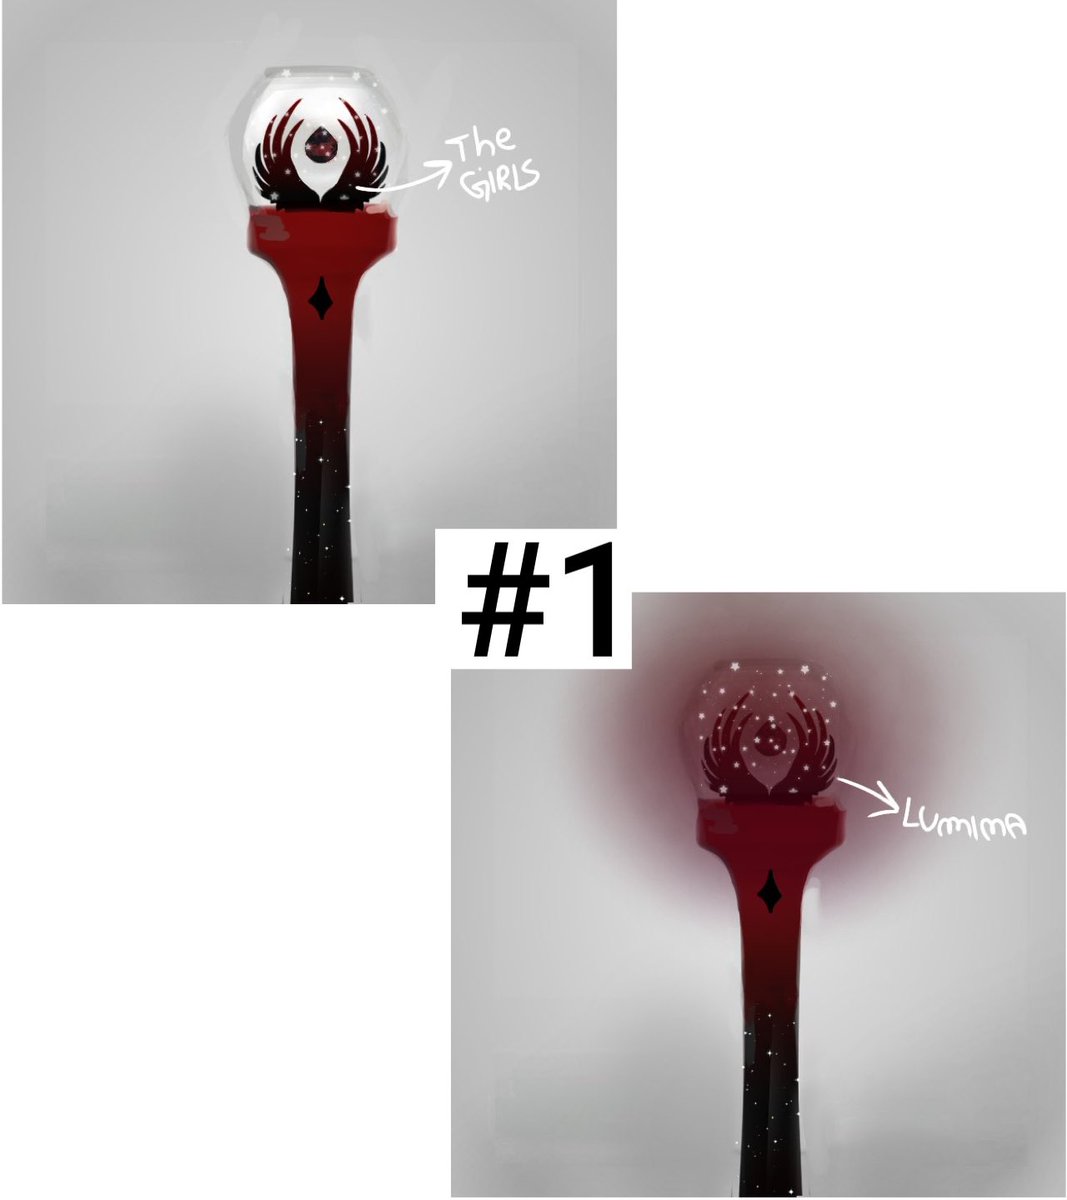 The girls have two lightsticks to choose from! Which one will you take?#1 -  @starlightkubo #2 -  @guinhoI vote  #BLACKSWAN for  #StanWorld  @blackswan_drent  #블랙스완 BS